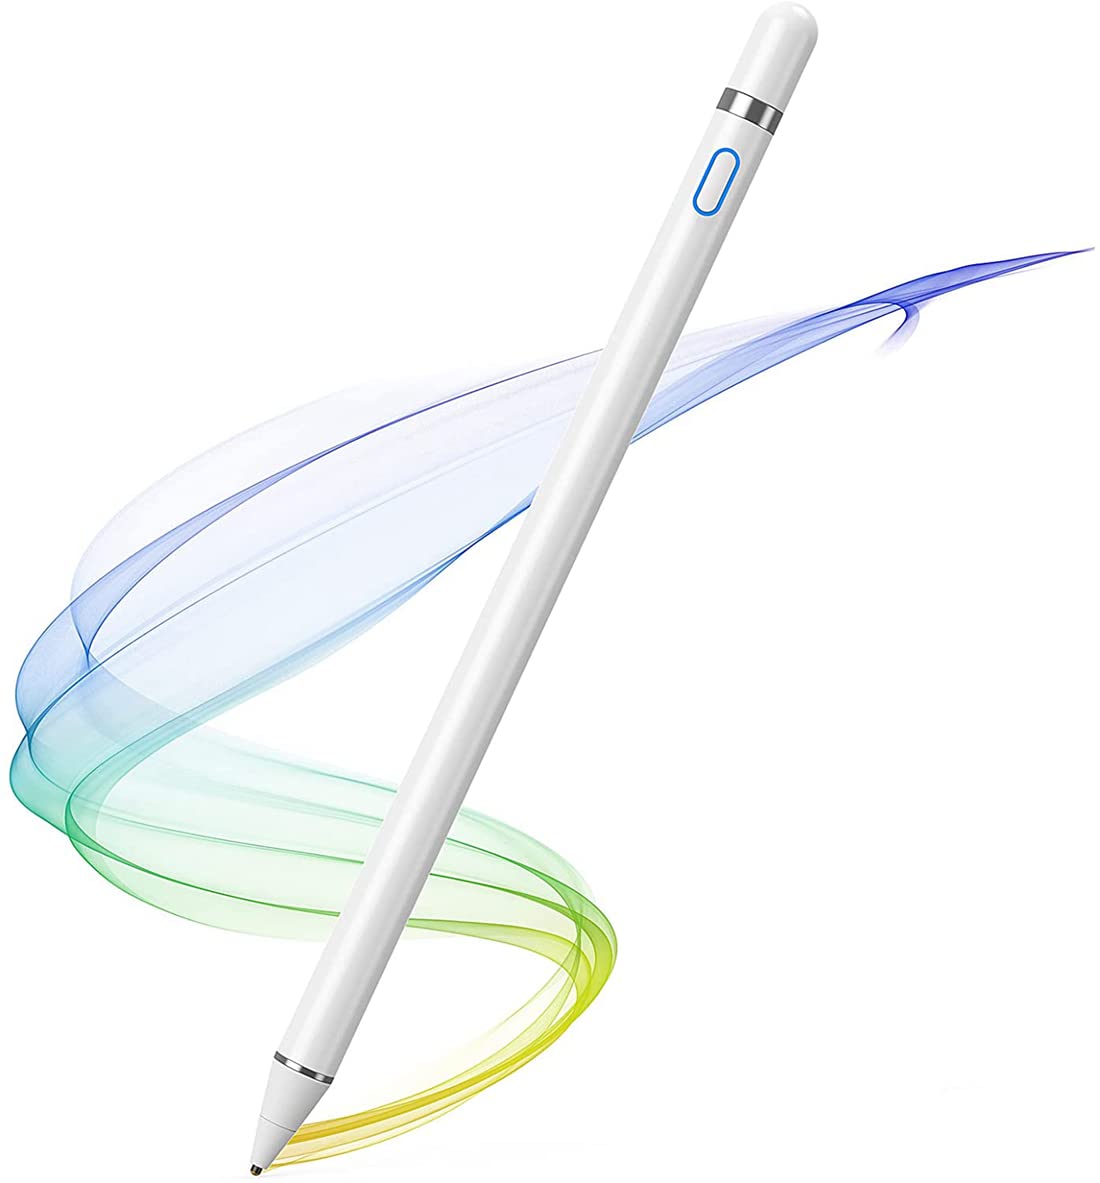 Rechargeable Active Stylus Touch Pen,High Precision and Sensitivity Capacitive Stylus Compatible with iOS,Android,iPhone,iPad,Samsung,Tablet Touchscreen Device(White)